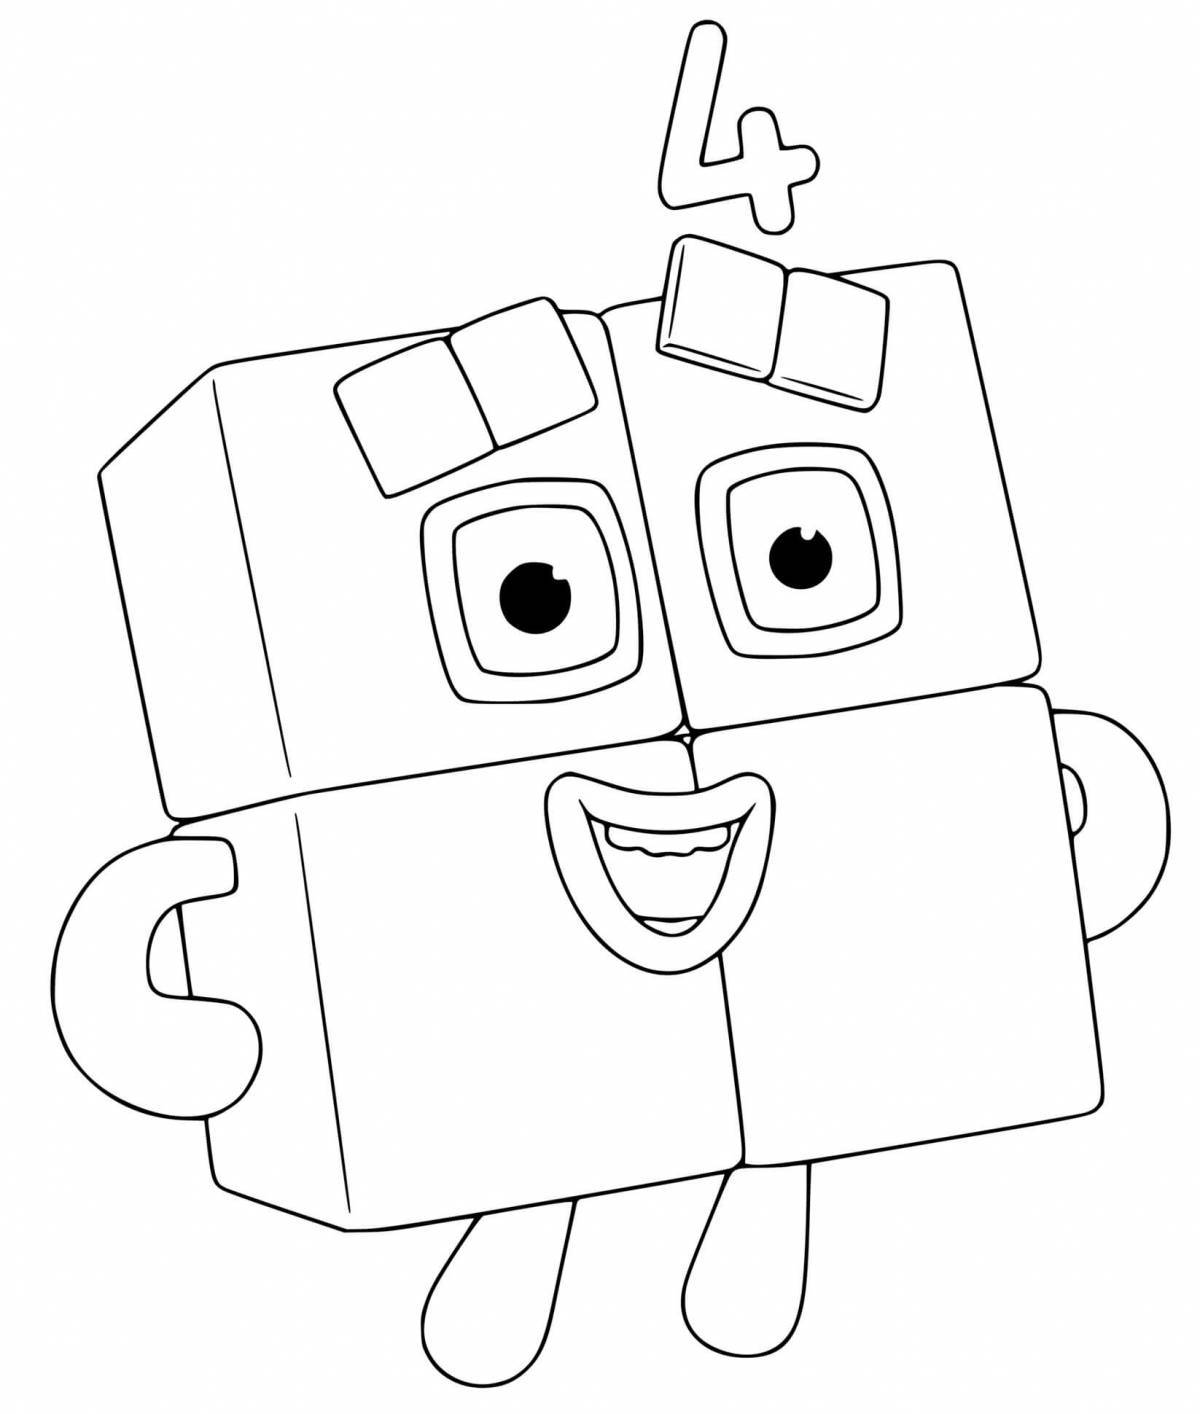 Happy number blocks coloring page